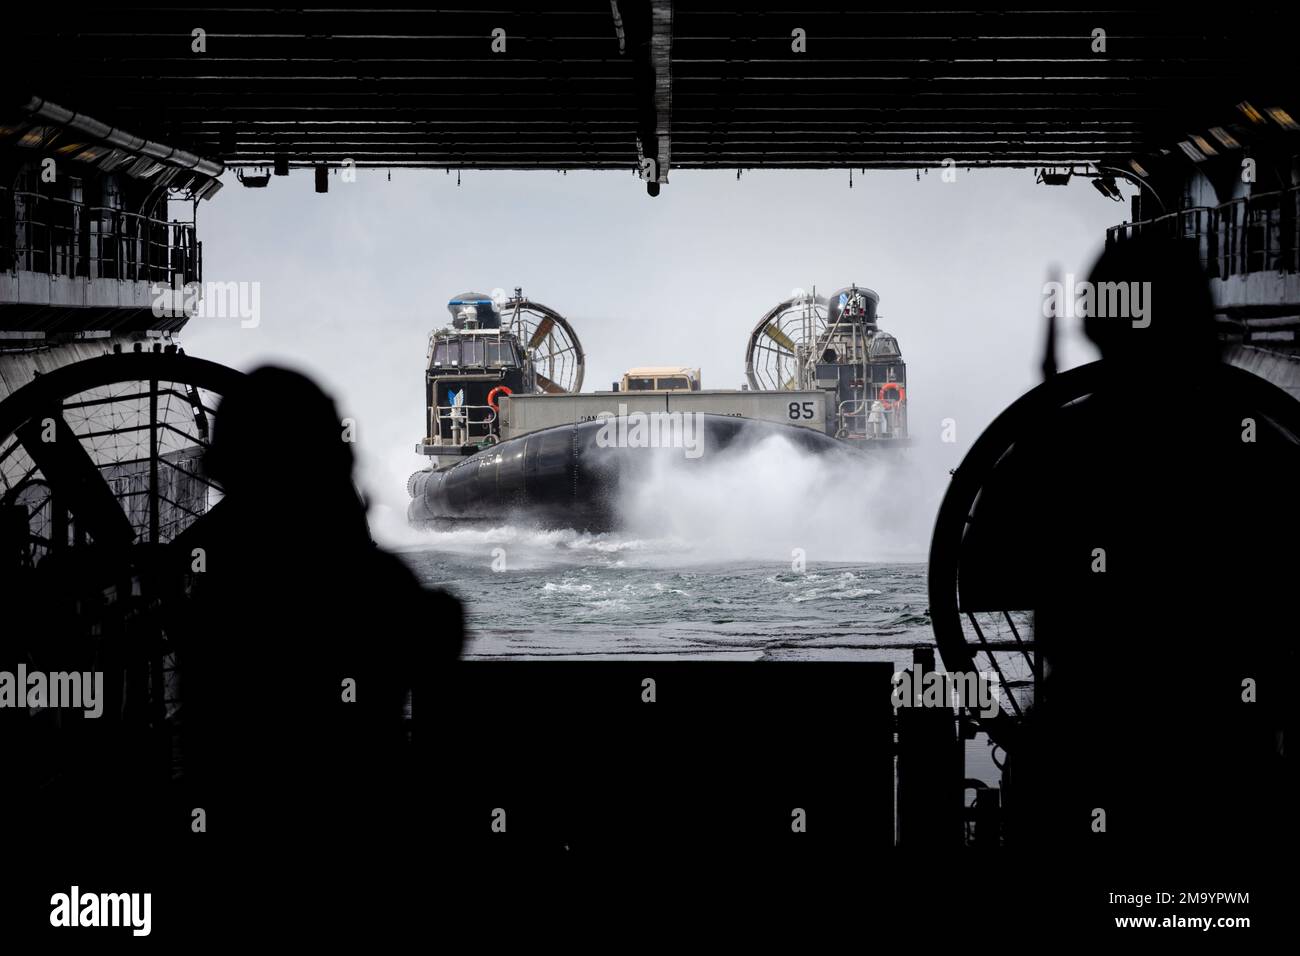 BALTIC SEA (May 21, 2022) – Landing Craft, Air Cushion 85, attached to Assault Craft Unit 4, approaches the well deck of the Wasp-class amphibious assault ship USS Kearsarge (LHD 3) May 21, 2022. Kearsarge, flagship of the Kearsarge Amphibious Ready Group and embarked 22nd Marine Expeditionary Unit, is participating in the Estonian-led exercise Siil 22 (Hedgehog 22 in English). Hedgehog 22 brings together members of the Estonian Defense Force and U.S. Sailors and Marines under Task Force 61/2 to enhance Allied interoperability and preserve security and stability in the Baltic region. Stock Photo